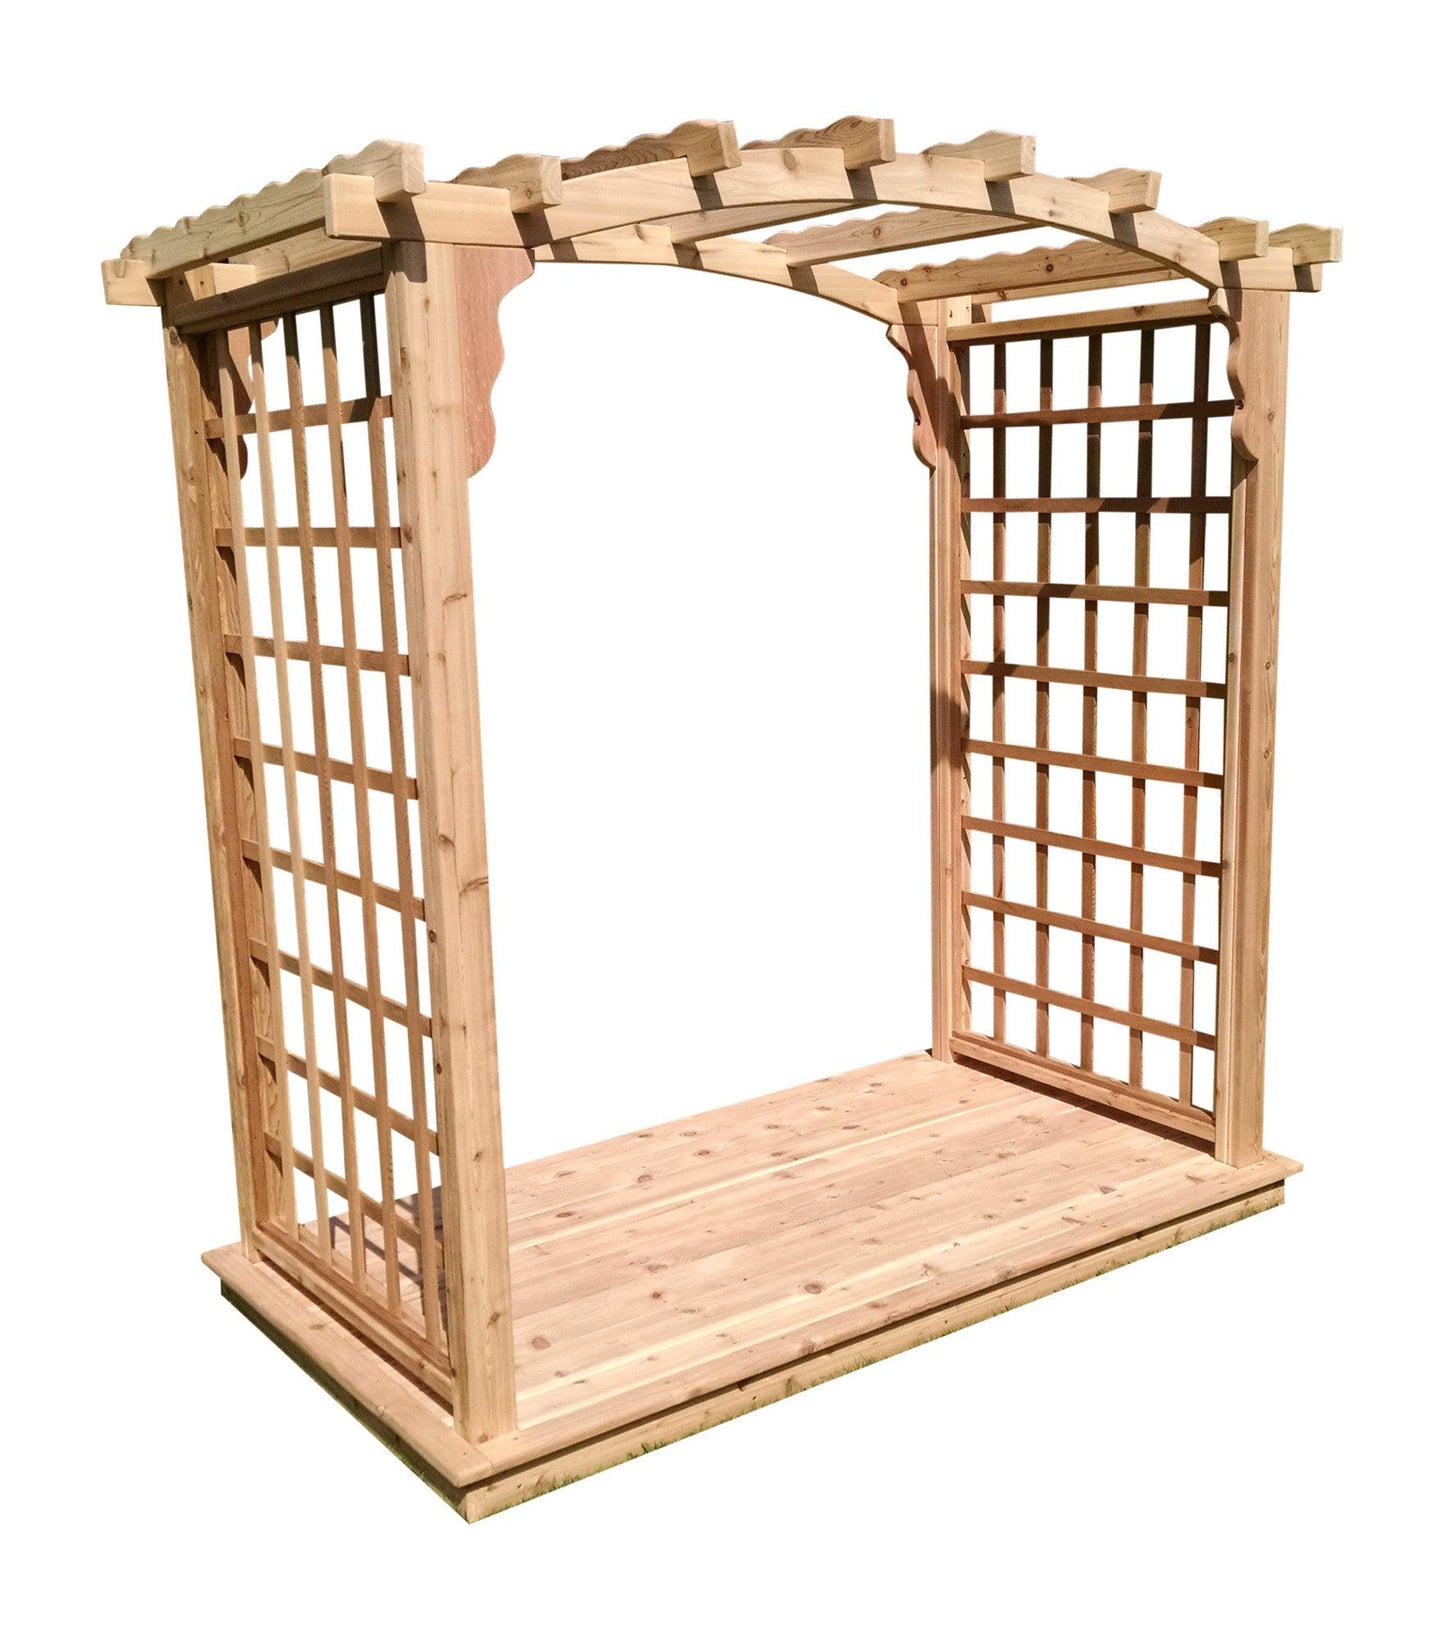 A&L Furniture Co. Western Red Cedar 5' Cambridge Arbor & Deck - LEAD TIME TO SHIP 4 WEEKS OR LESS